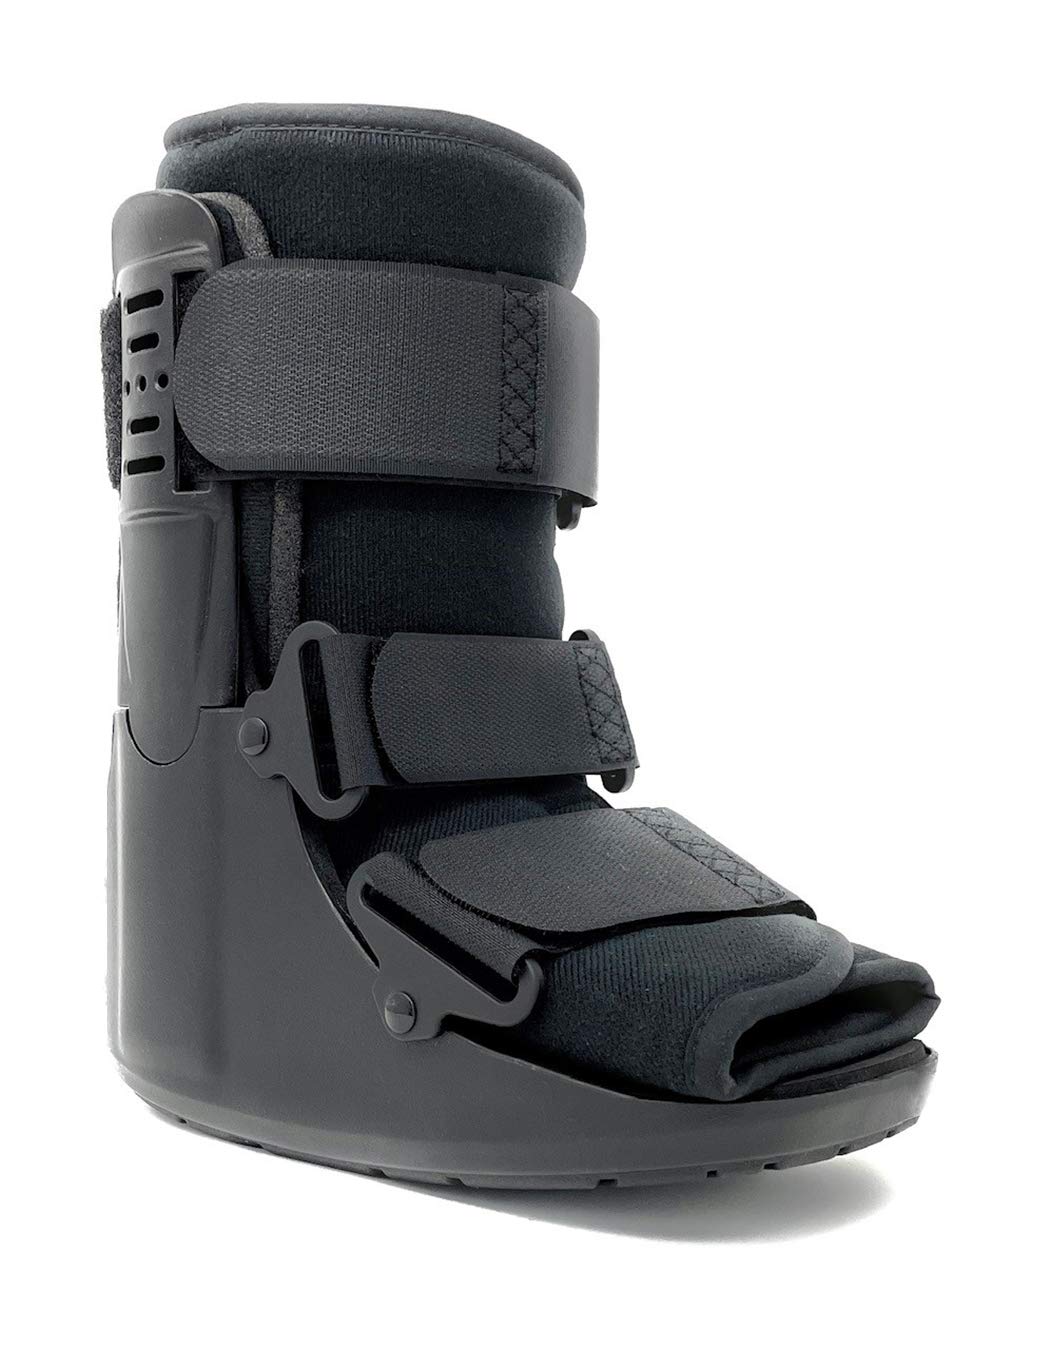 Ankle Brace - Aircast Flat Foot PTTD Brace, Aircast,Boot adult's walker, Foot  Braces, Foot compression sleeve, Rehabilitation at home, Valgus deformity  of legs, Orthotics measurment, Foot Braces. Photos